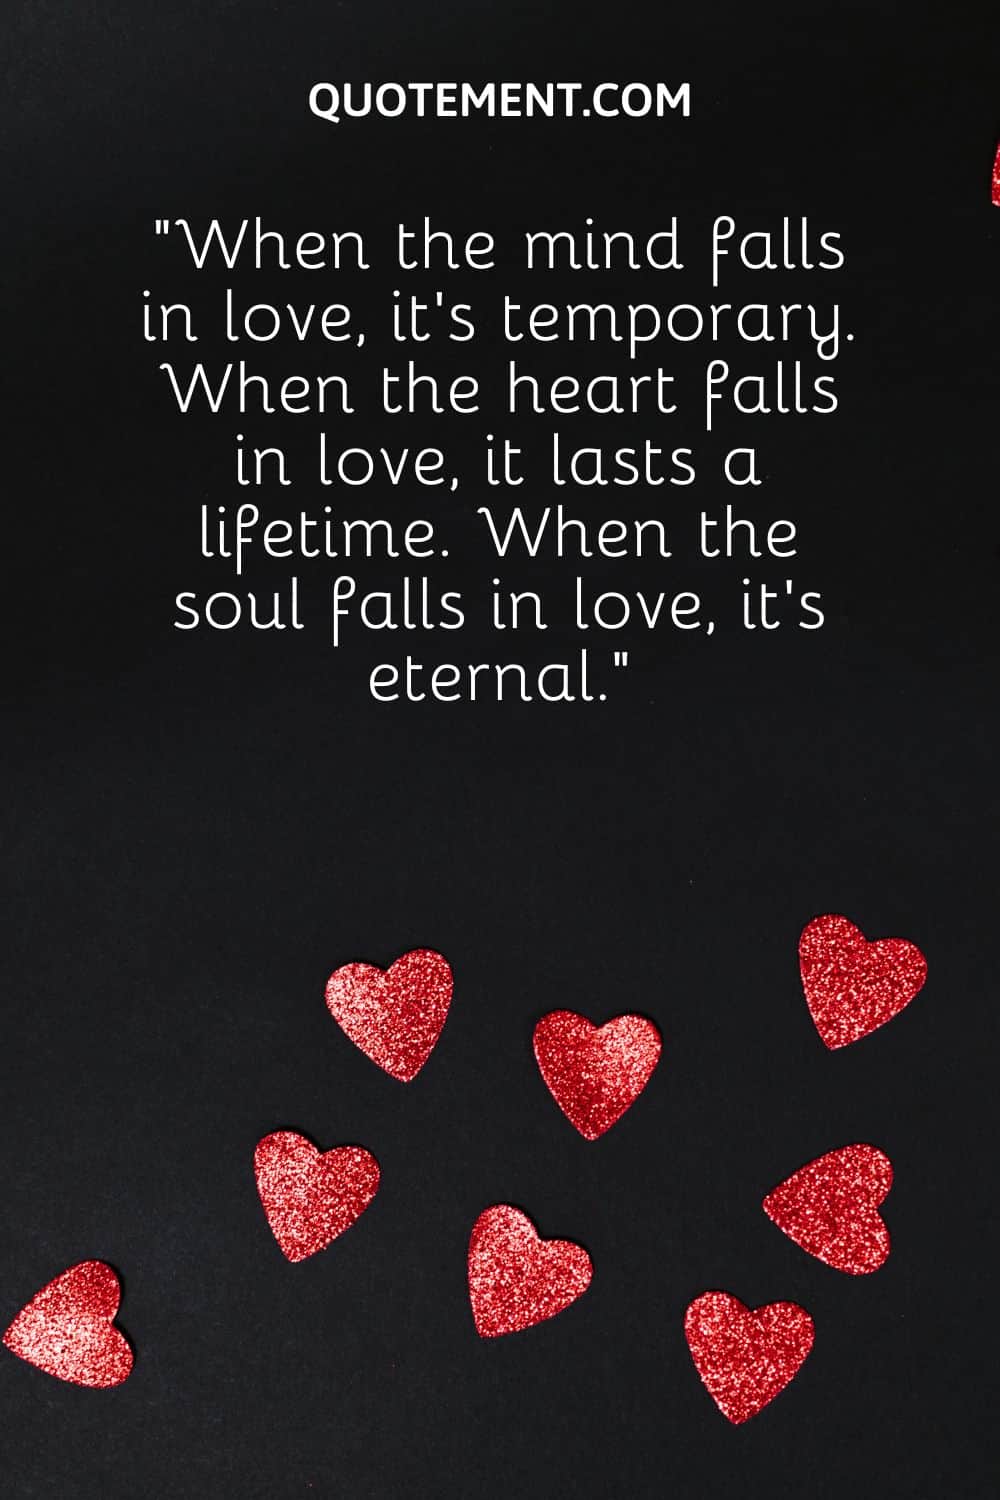 “When the mind falls in love, it’s temporary. When the heart falls in love, it lasts a lifetime. When the soul falls in love, it’s eternal.”